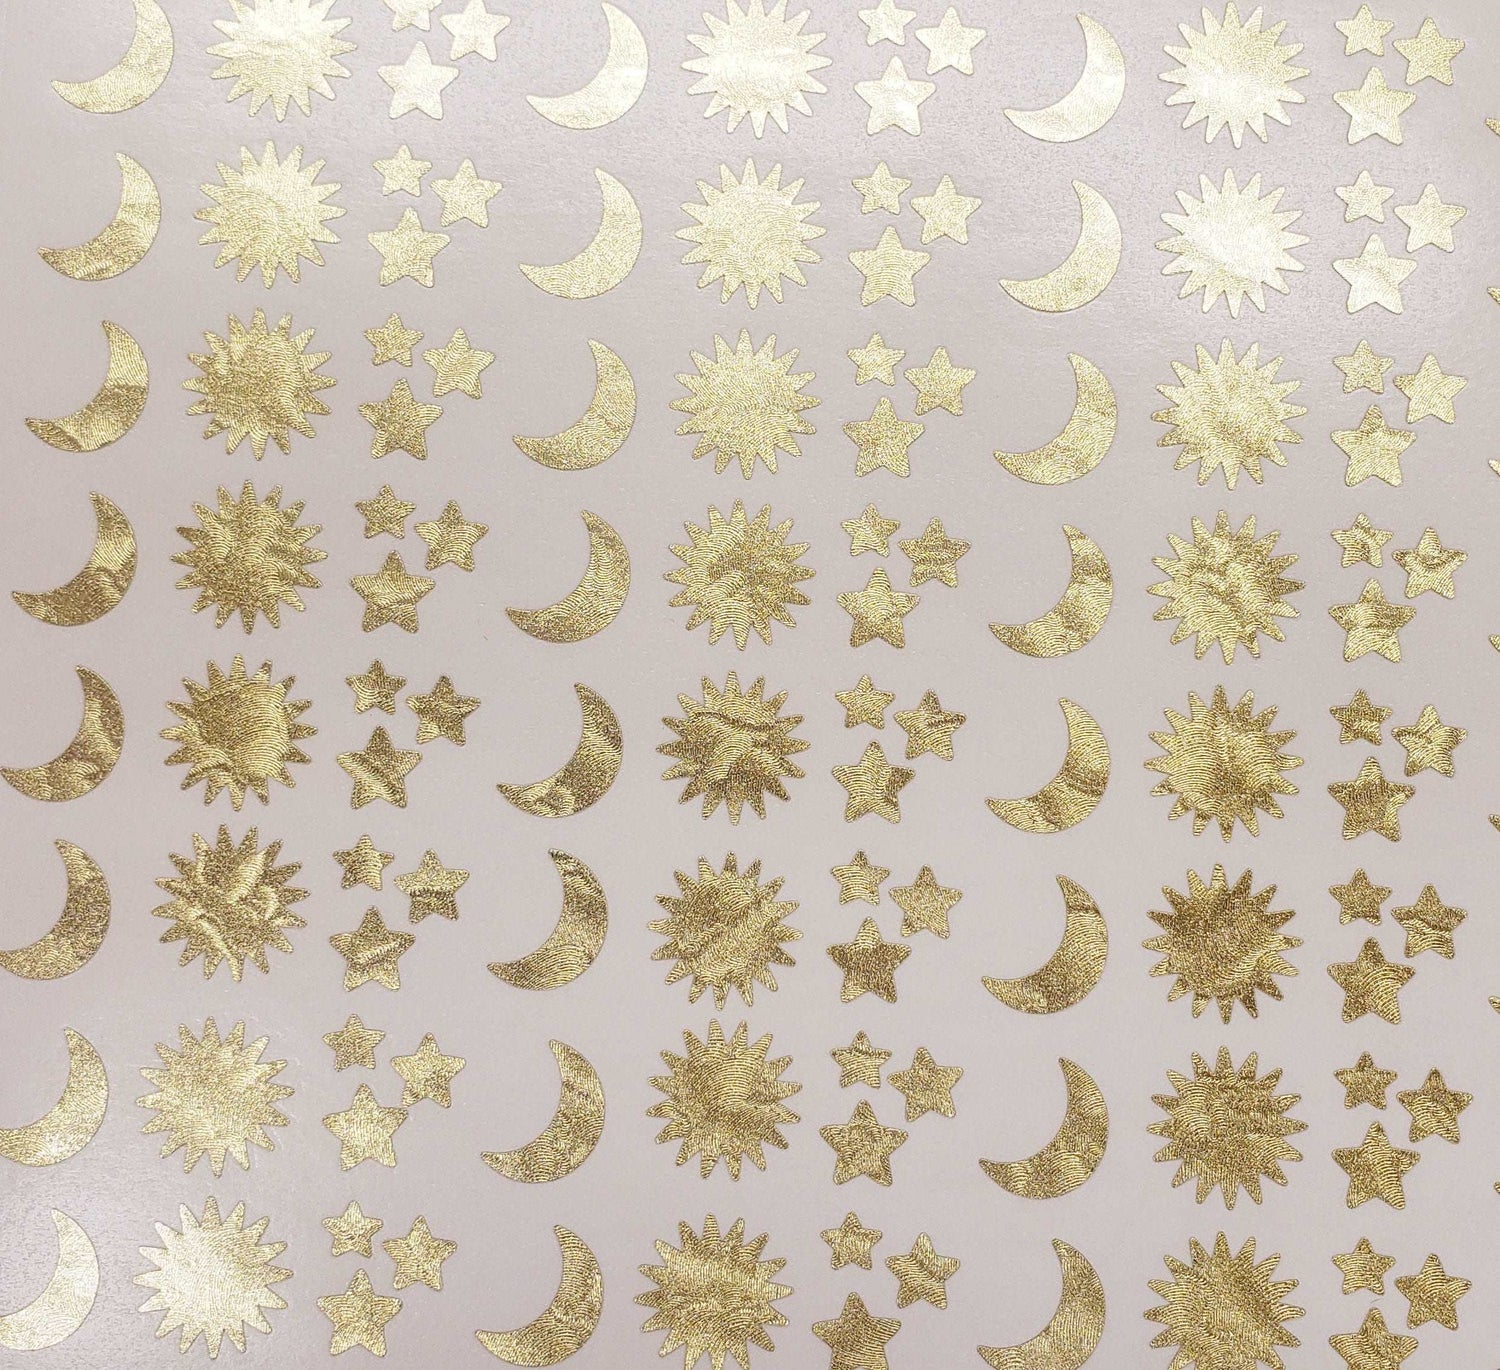 gold sun moon and stars stickers